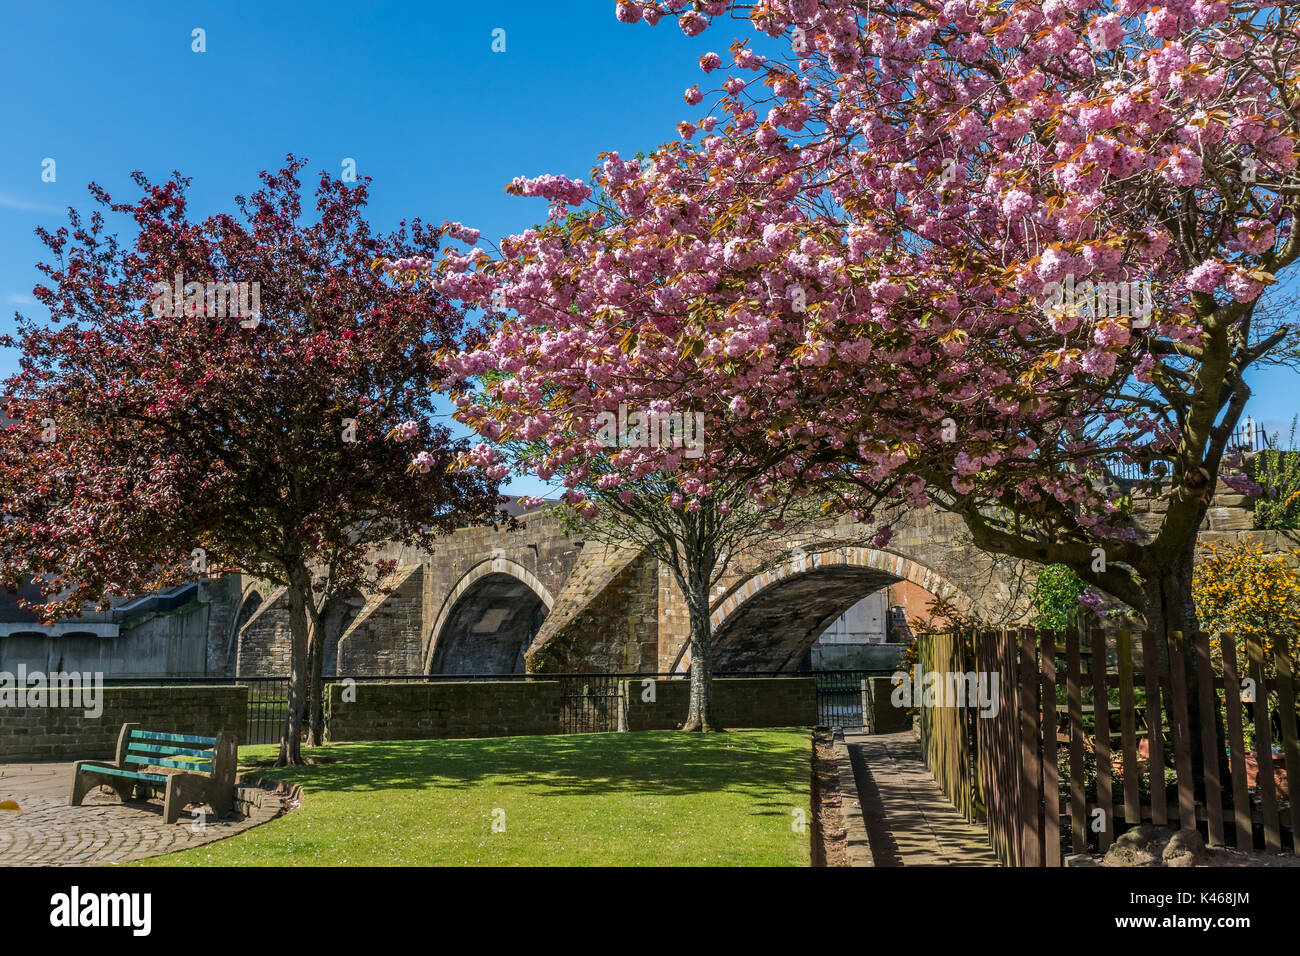 Cherry blossoms in full bloom in front of the old bridge in Ayr. Stock Photo